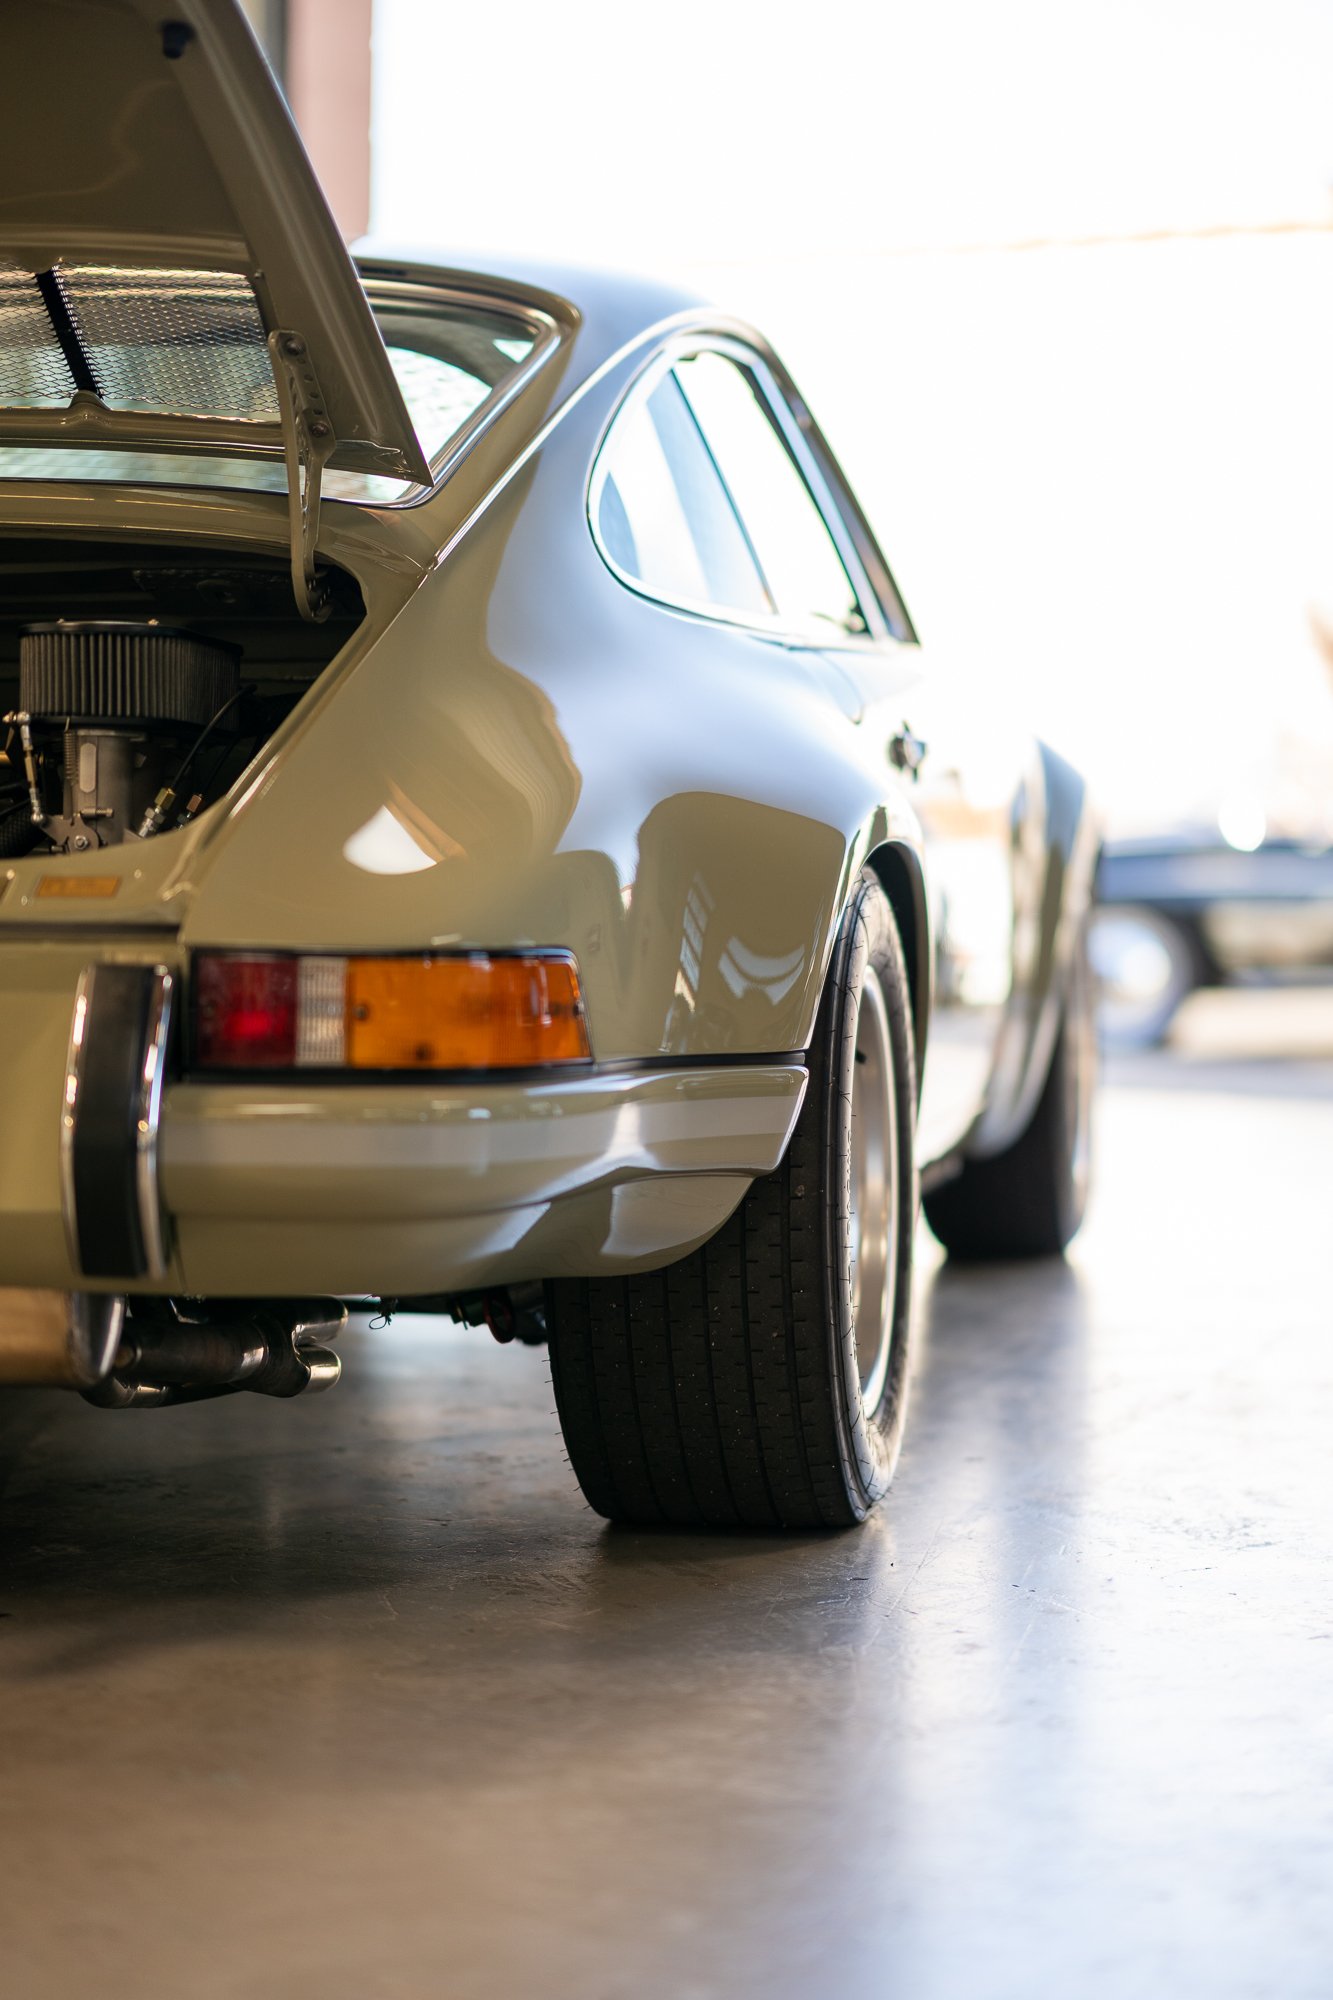 A CPR built early 911 hot rod.